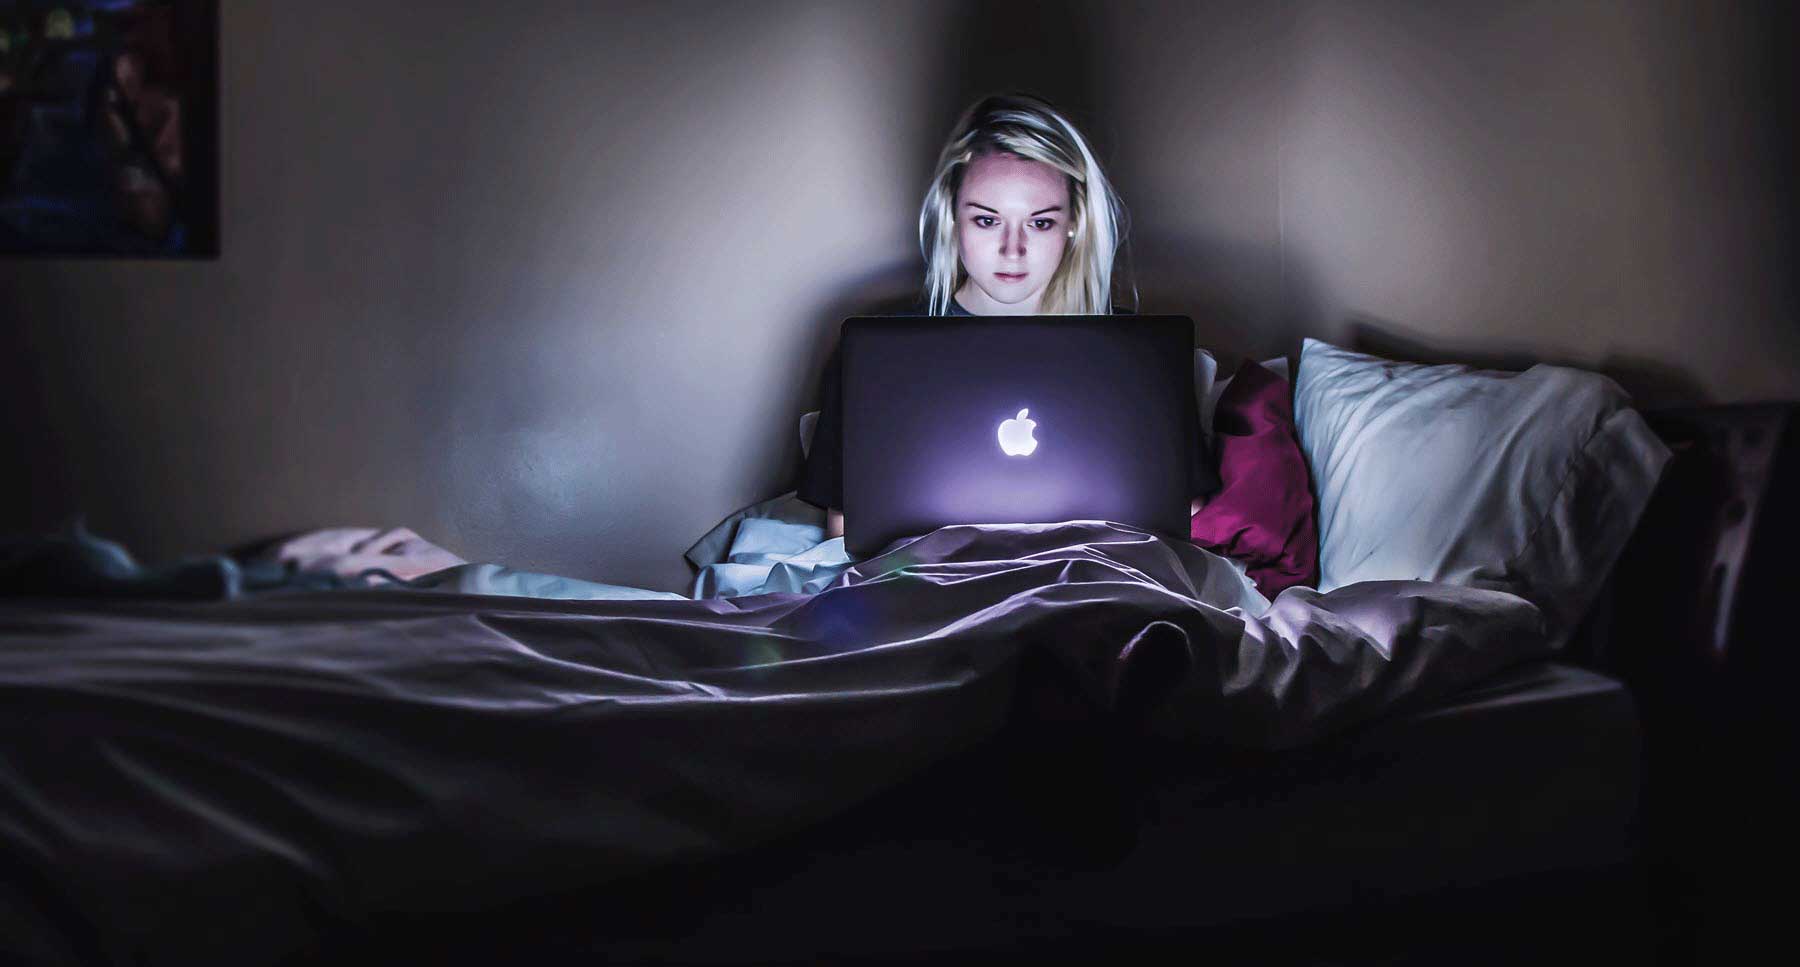 woman-in-her-bedroom-addcited-to-masturbation-pornography-on-computer